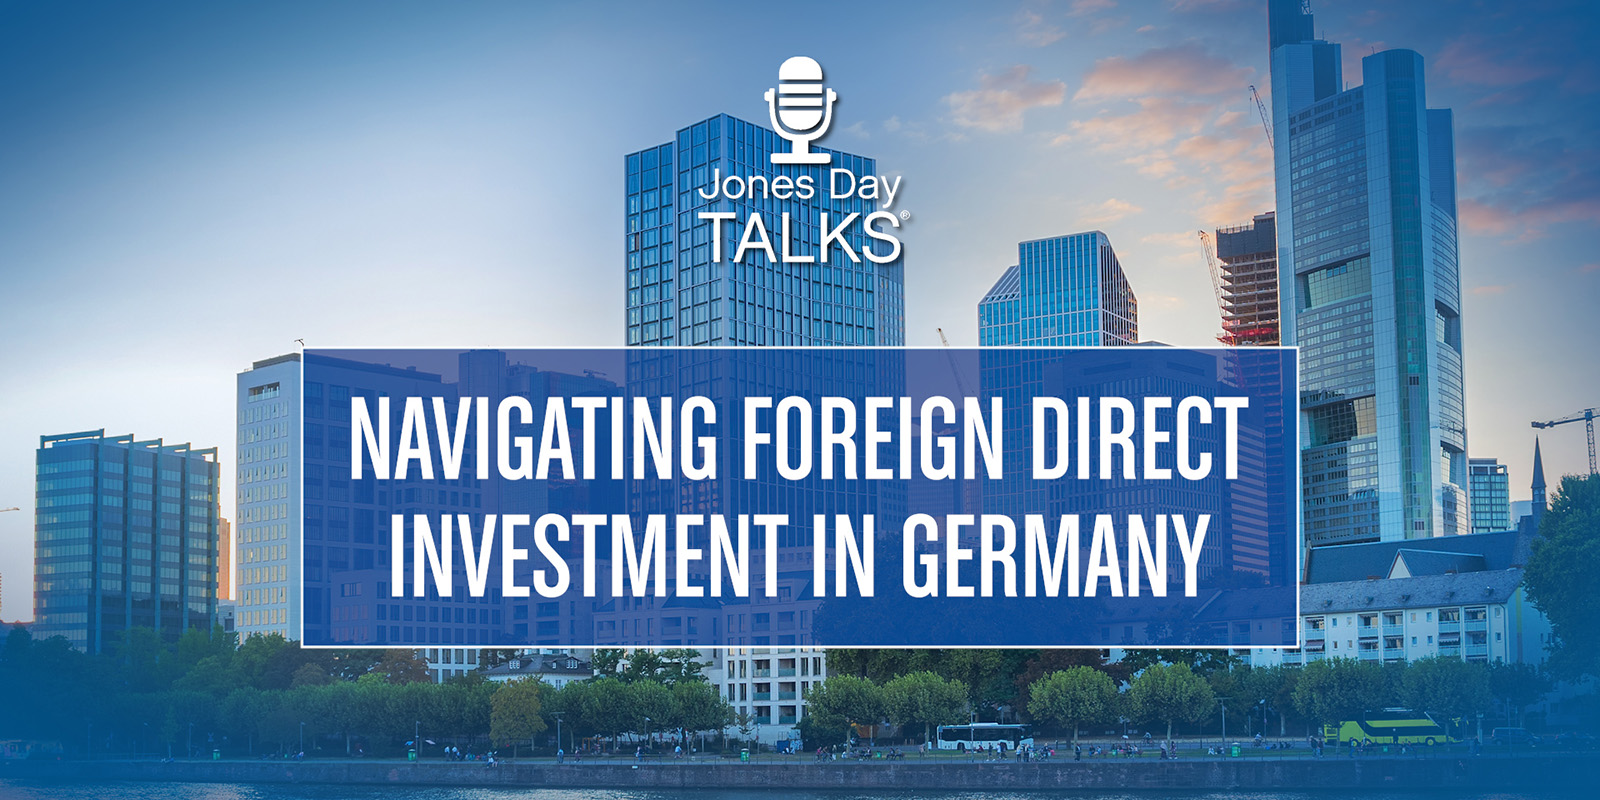   Jones Day Talks: Navigating Foreign Direct Investment in Germany